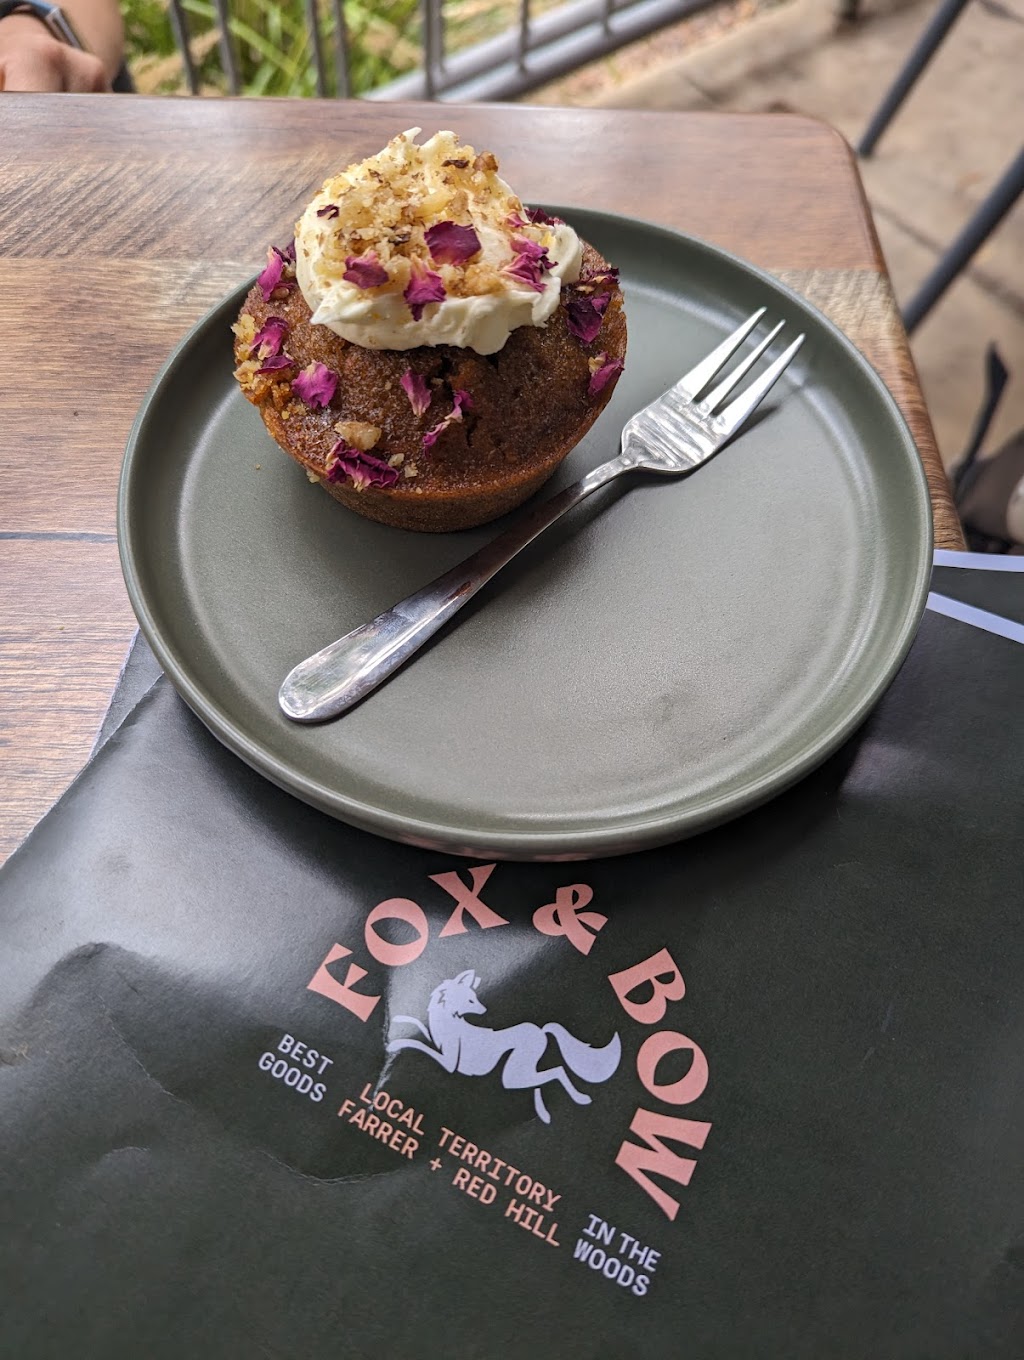 Fox & Bow - Red Hill | cafe | 10 Duyfken Pl, Red Hill ACT 2603, Australia | 0422108713 OR +61 422 108 713